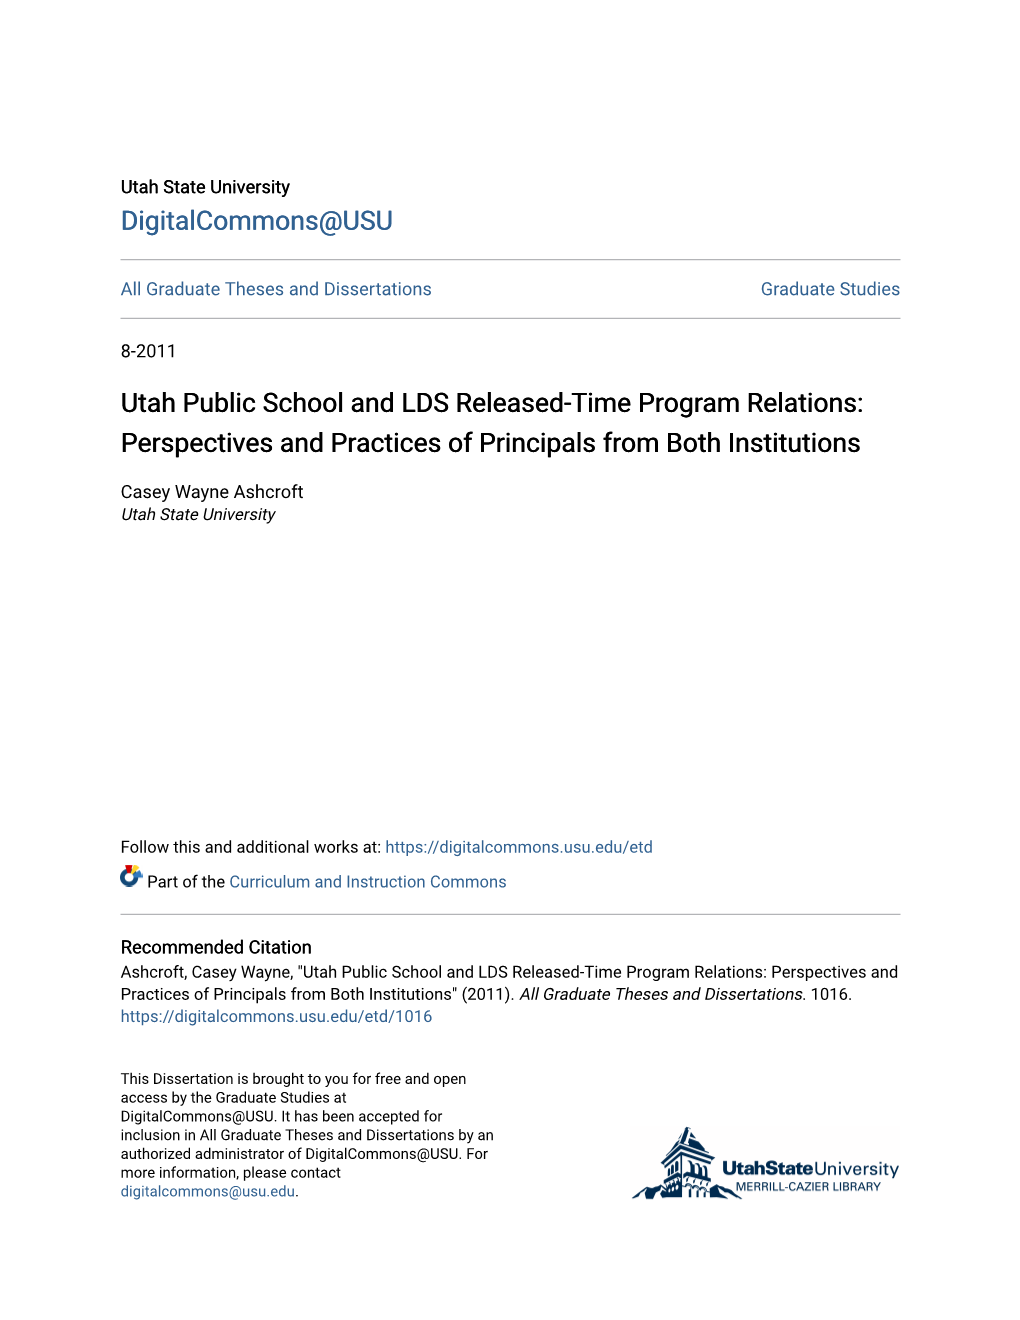 Utah Public School and LDS Released-Time Program Relations: Perspectives and Practices of Principals from Both Institutions